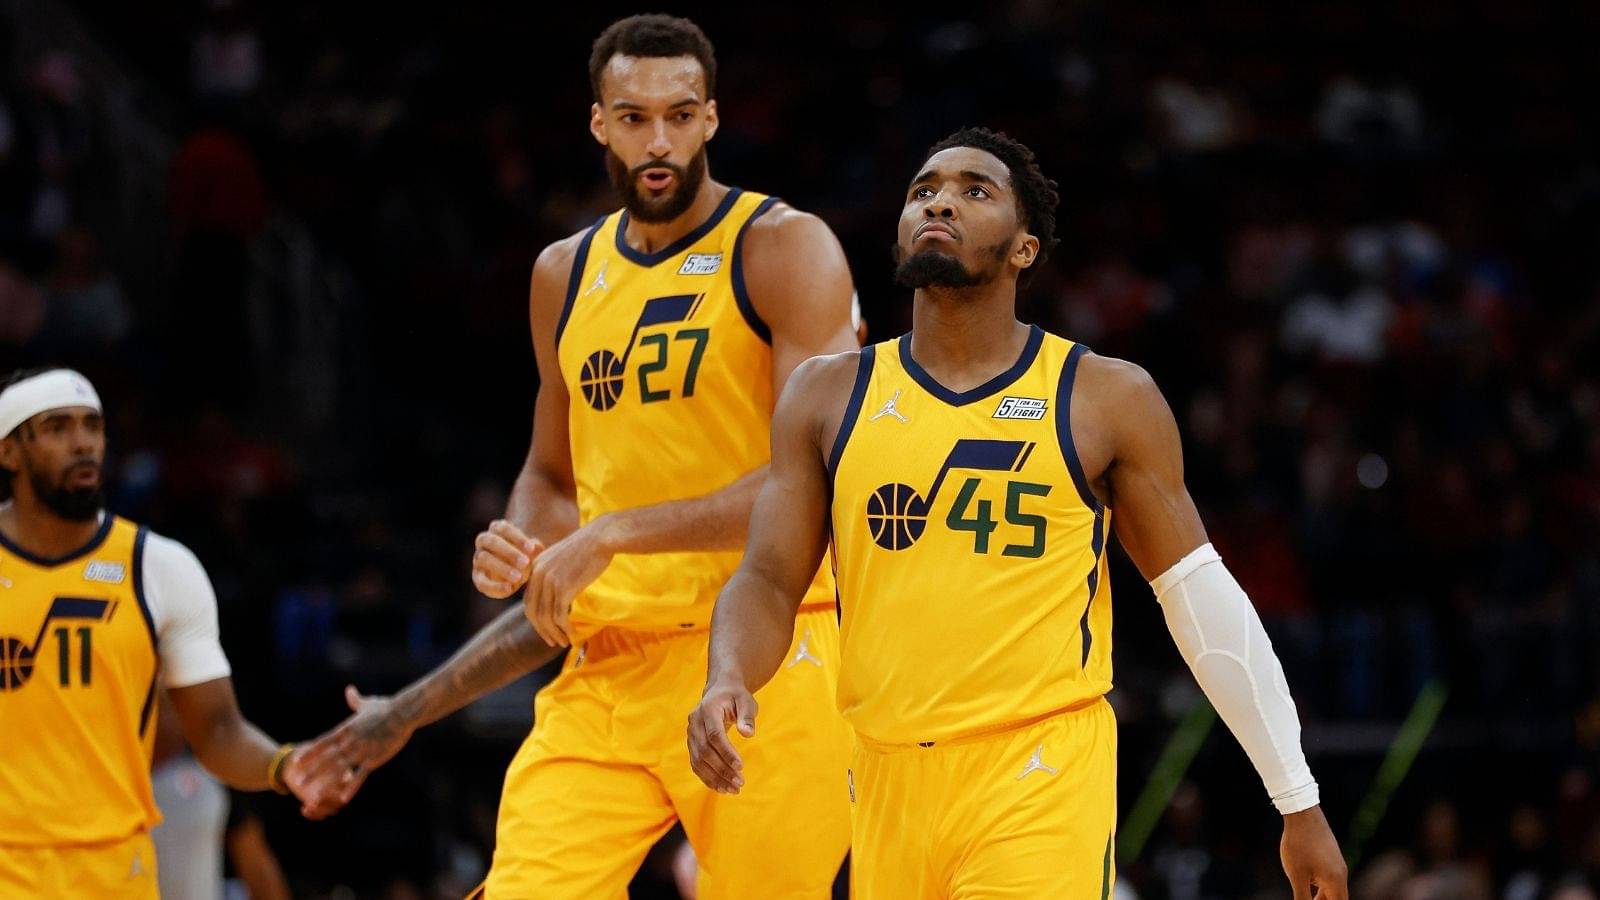 "You can tell Devin Booker is playing his a*s off defensively": When Rudy Gobert praising the Suns guard clearly came off as an attack on Donovan Mitchell, how that can affect offseason for Utah Jazz